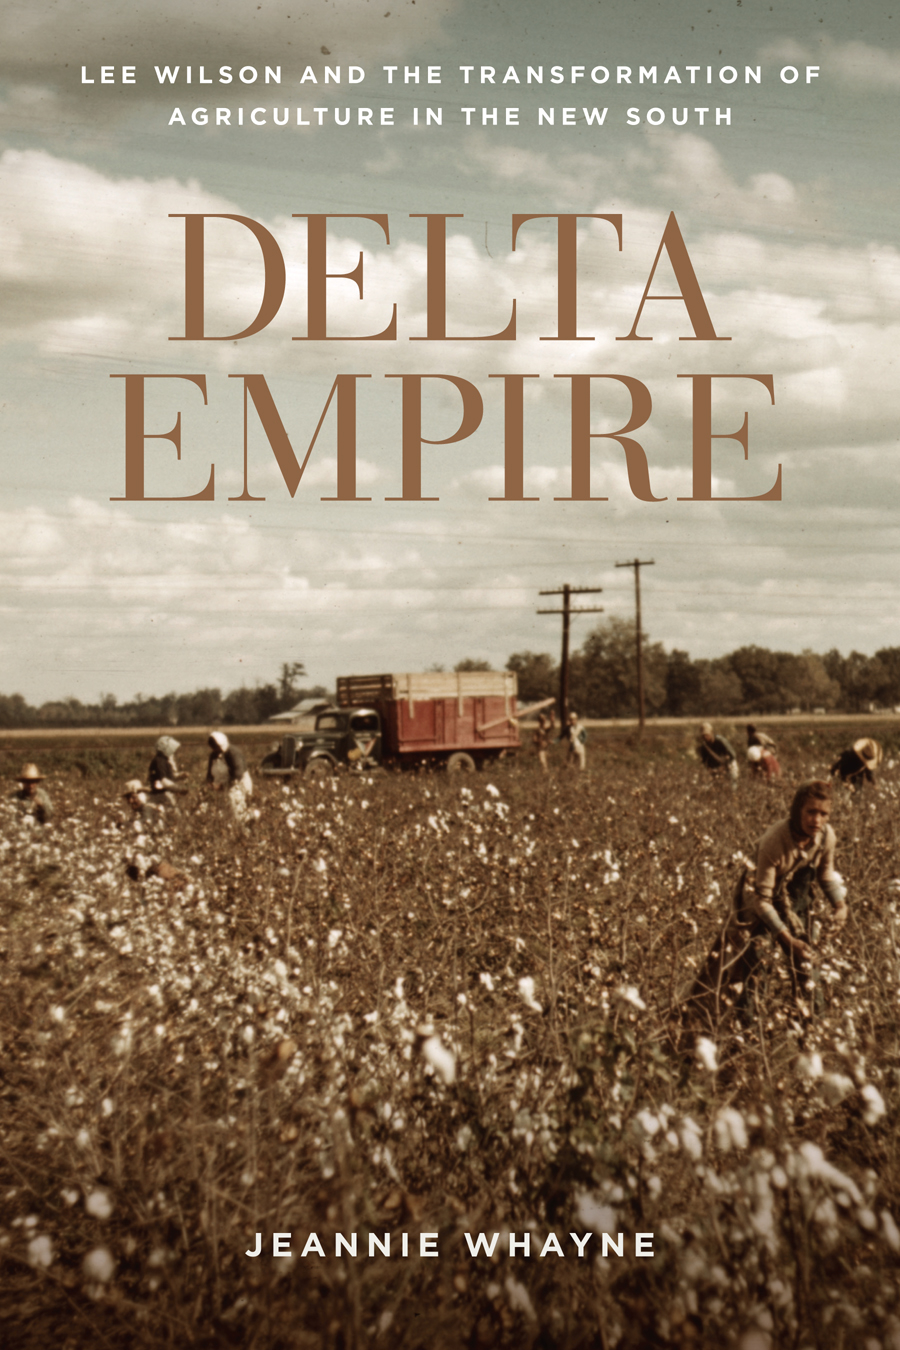 Delta Empire by Jeannie Whayne